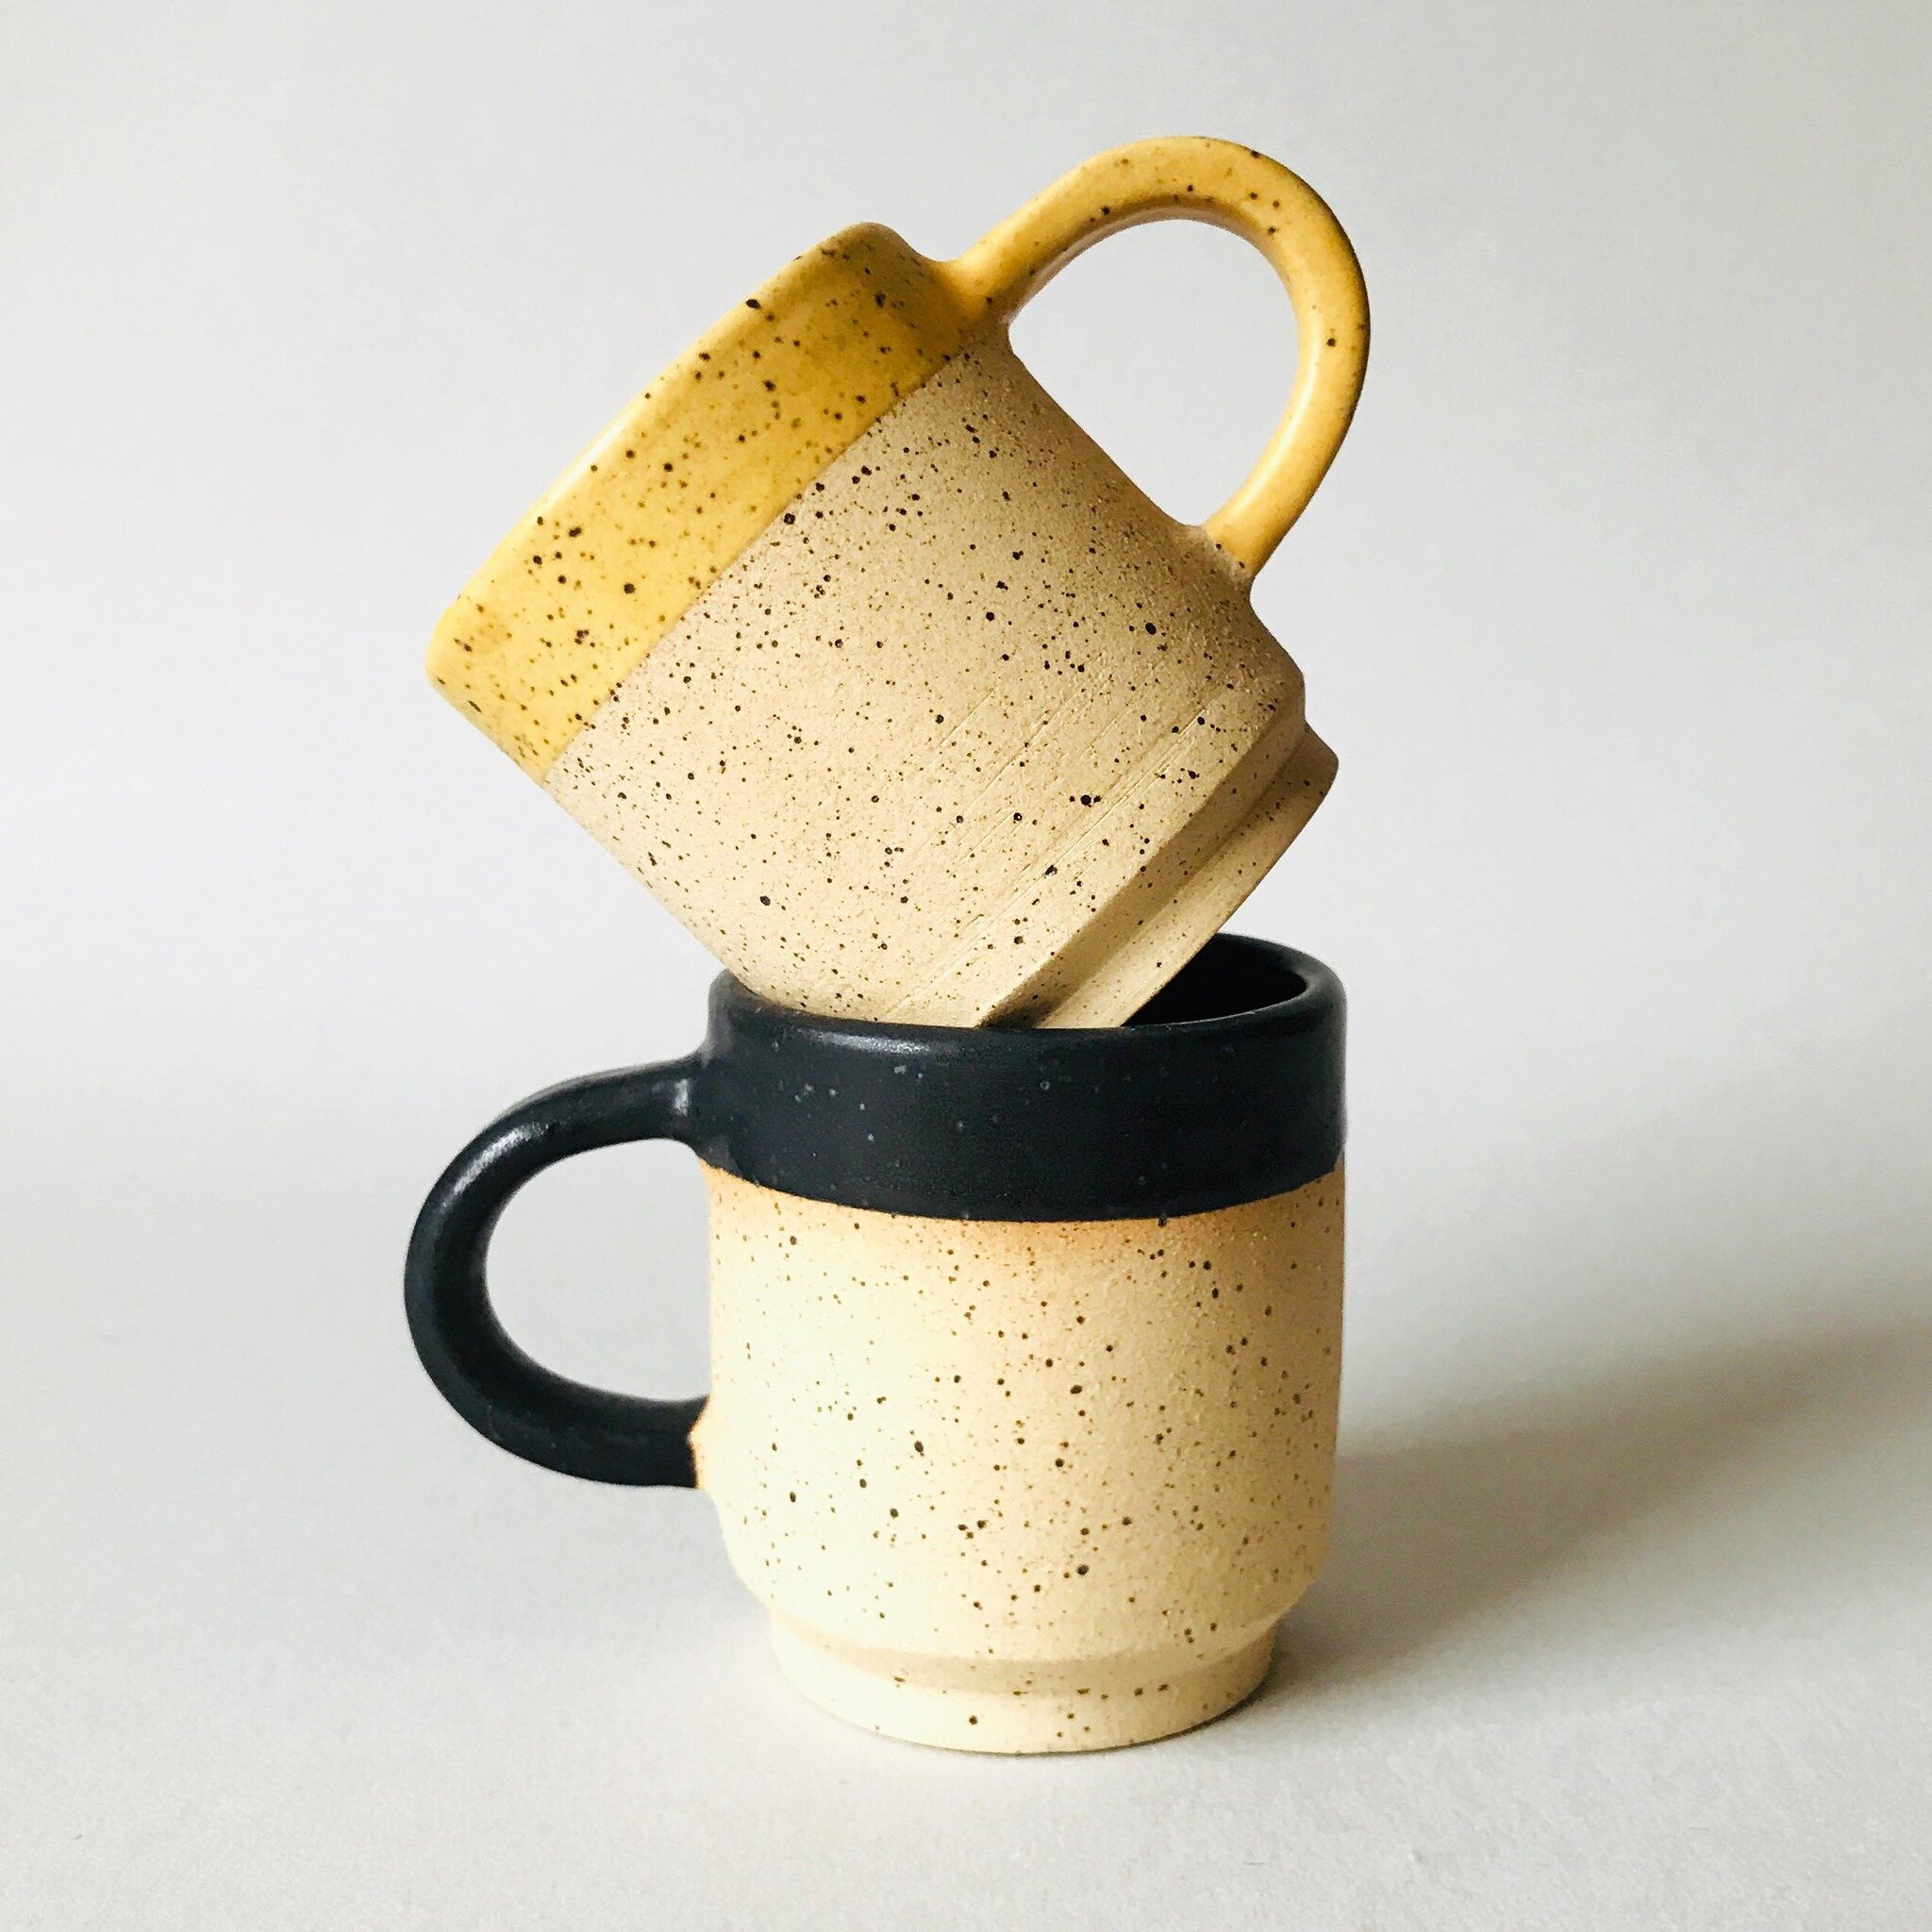 Tiny, mini, short, pretty little cup with a handle. Available in two colours with matte glaze: Black and Goldenrod. 
&hellip;
#espresso #coffee #mug #ceramic #handmadehomegoods #pottery